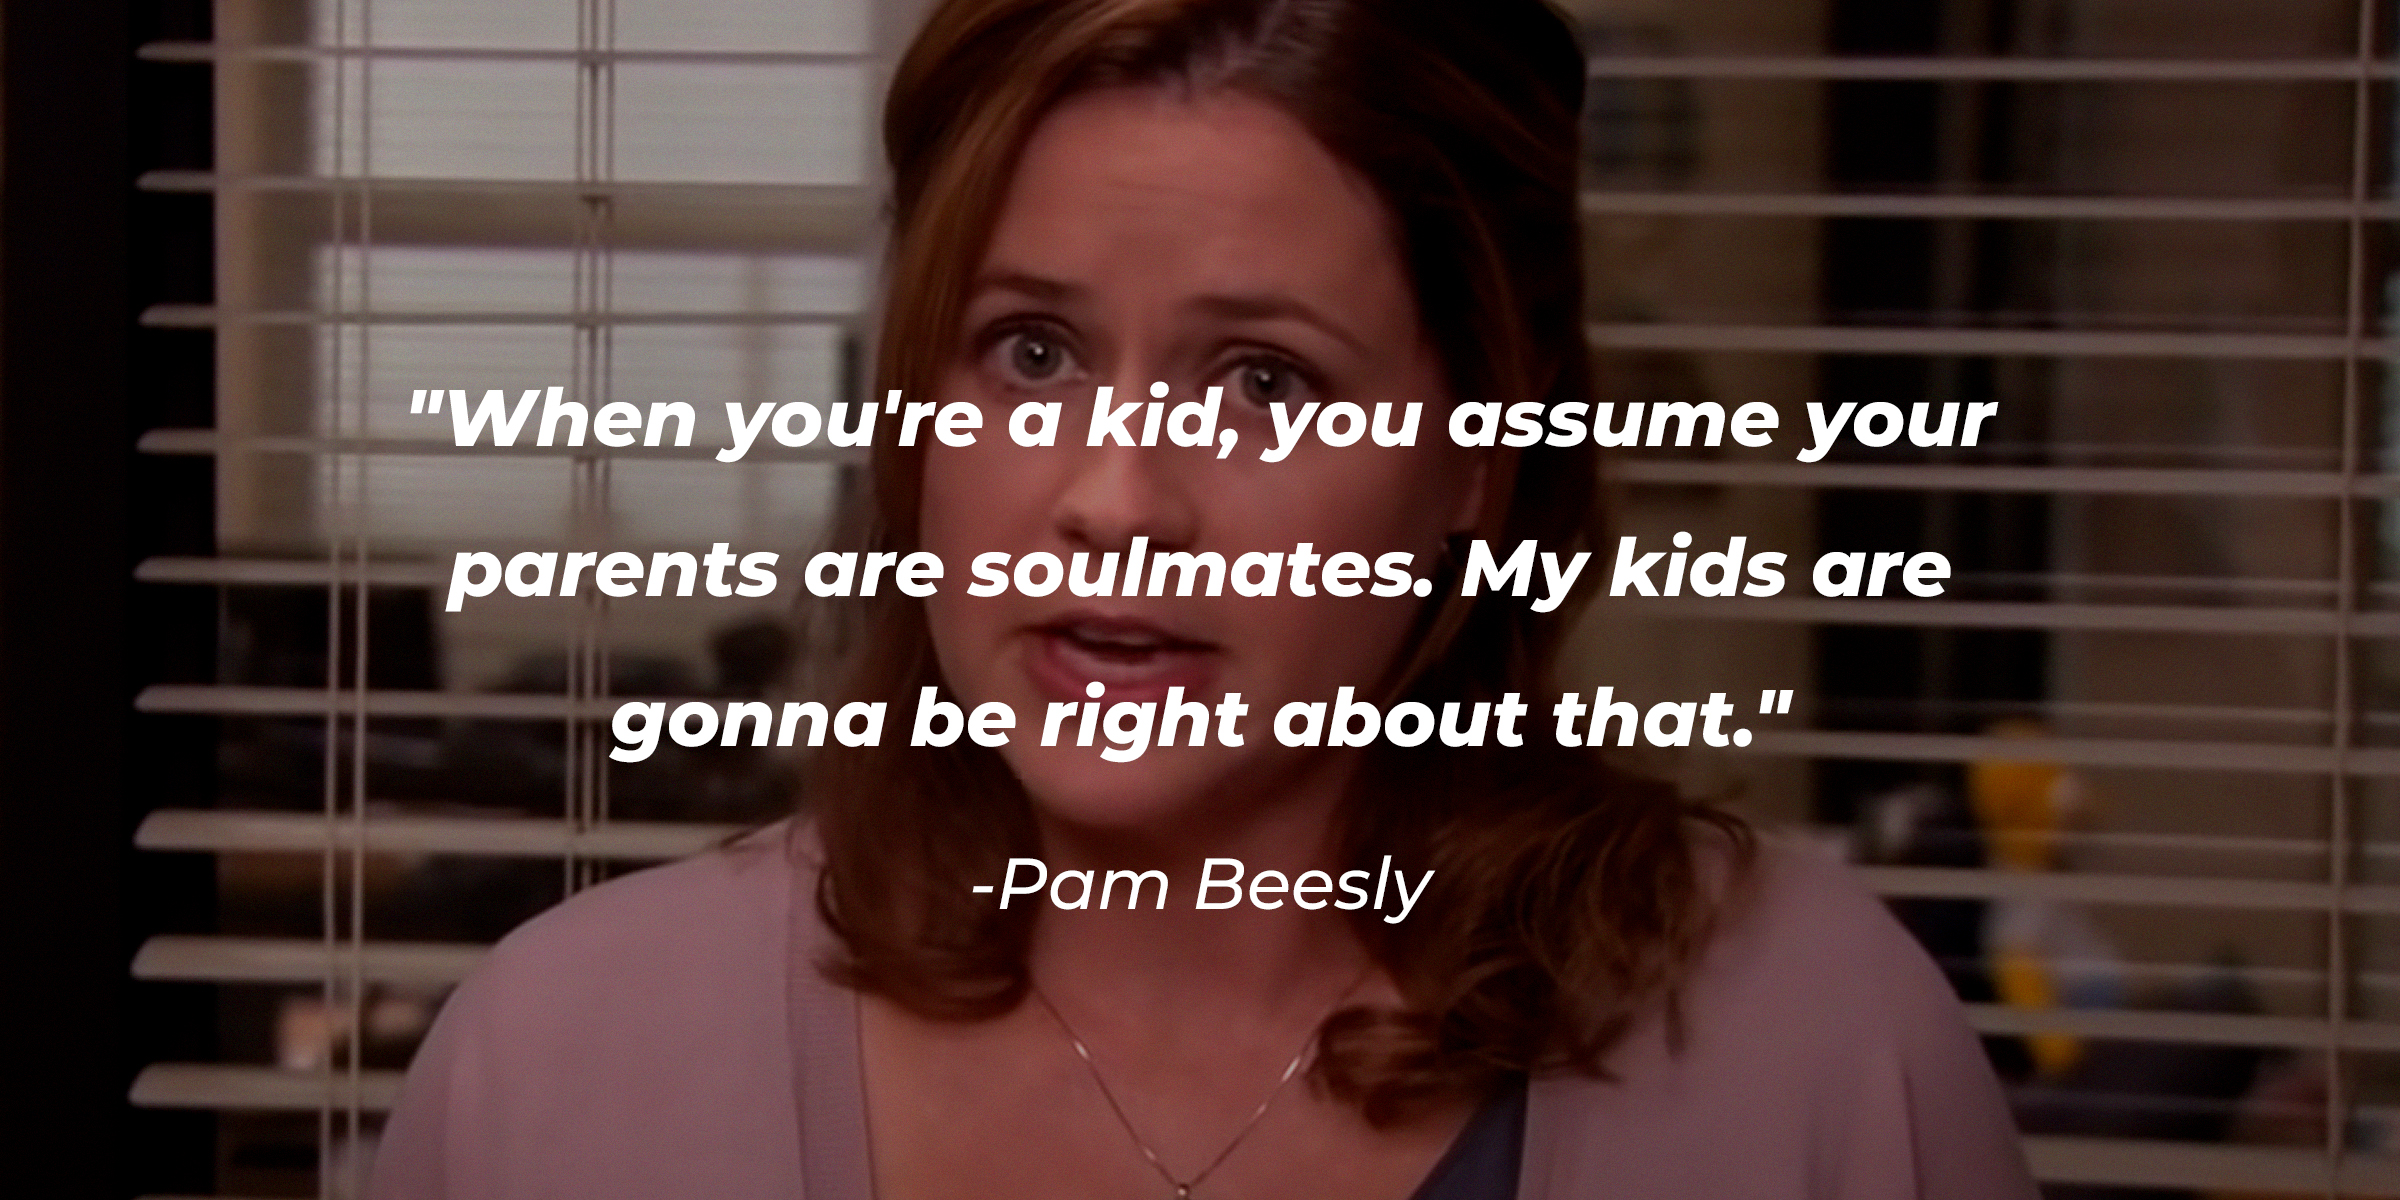 Pam Beesly’s quote: "When you're a kid, you assume your parents are soulmates. My kids are gonna be right about that." | Source: Youtube.com/TheOffice